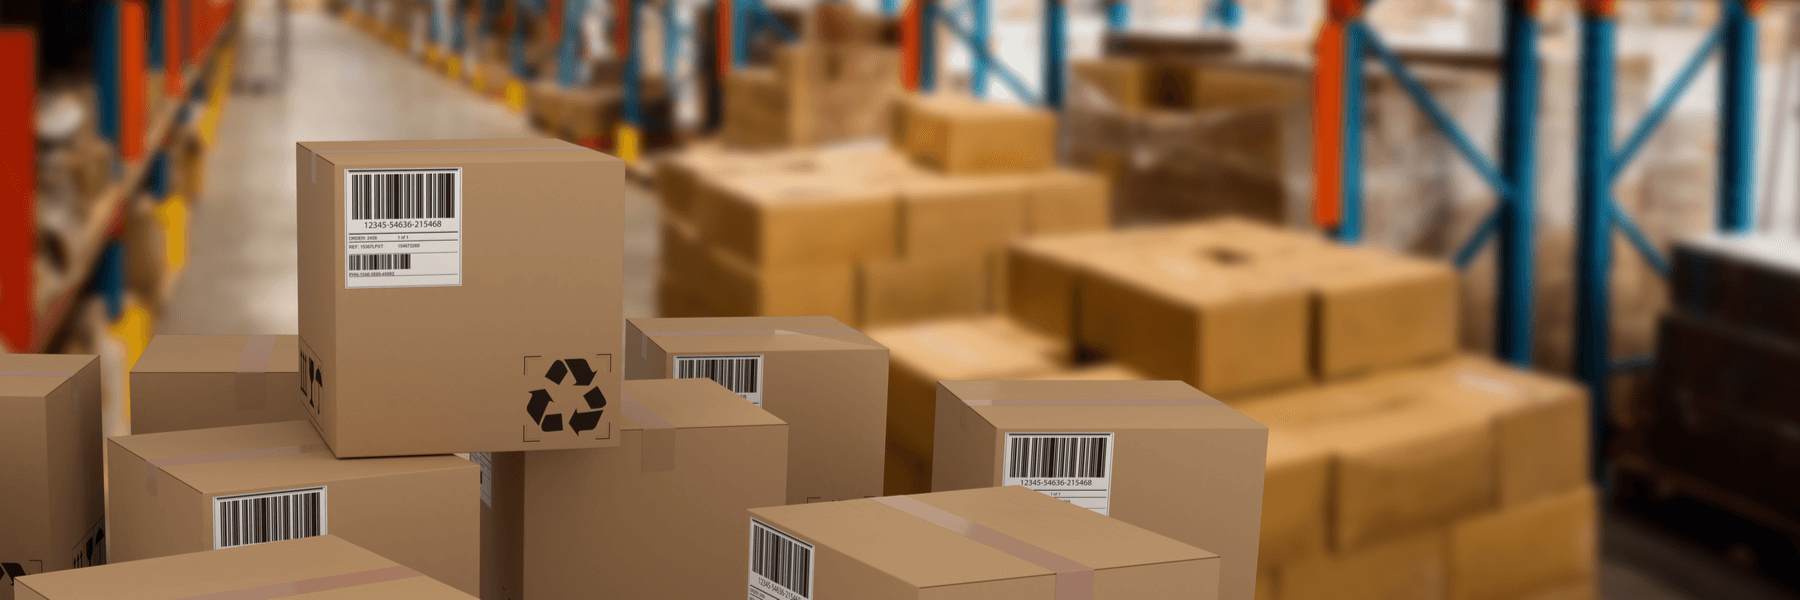 thermal printed barcodes on boxes in manufacturing warehouse